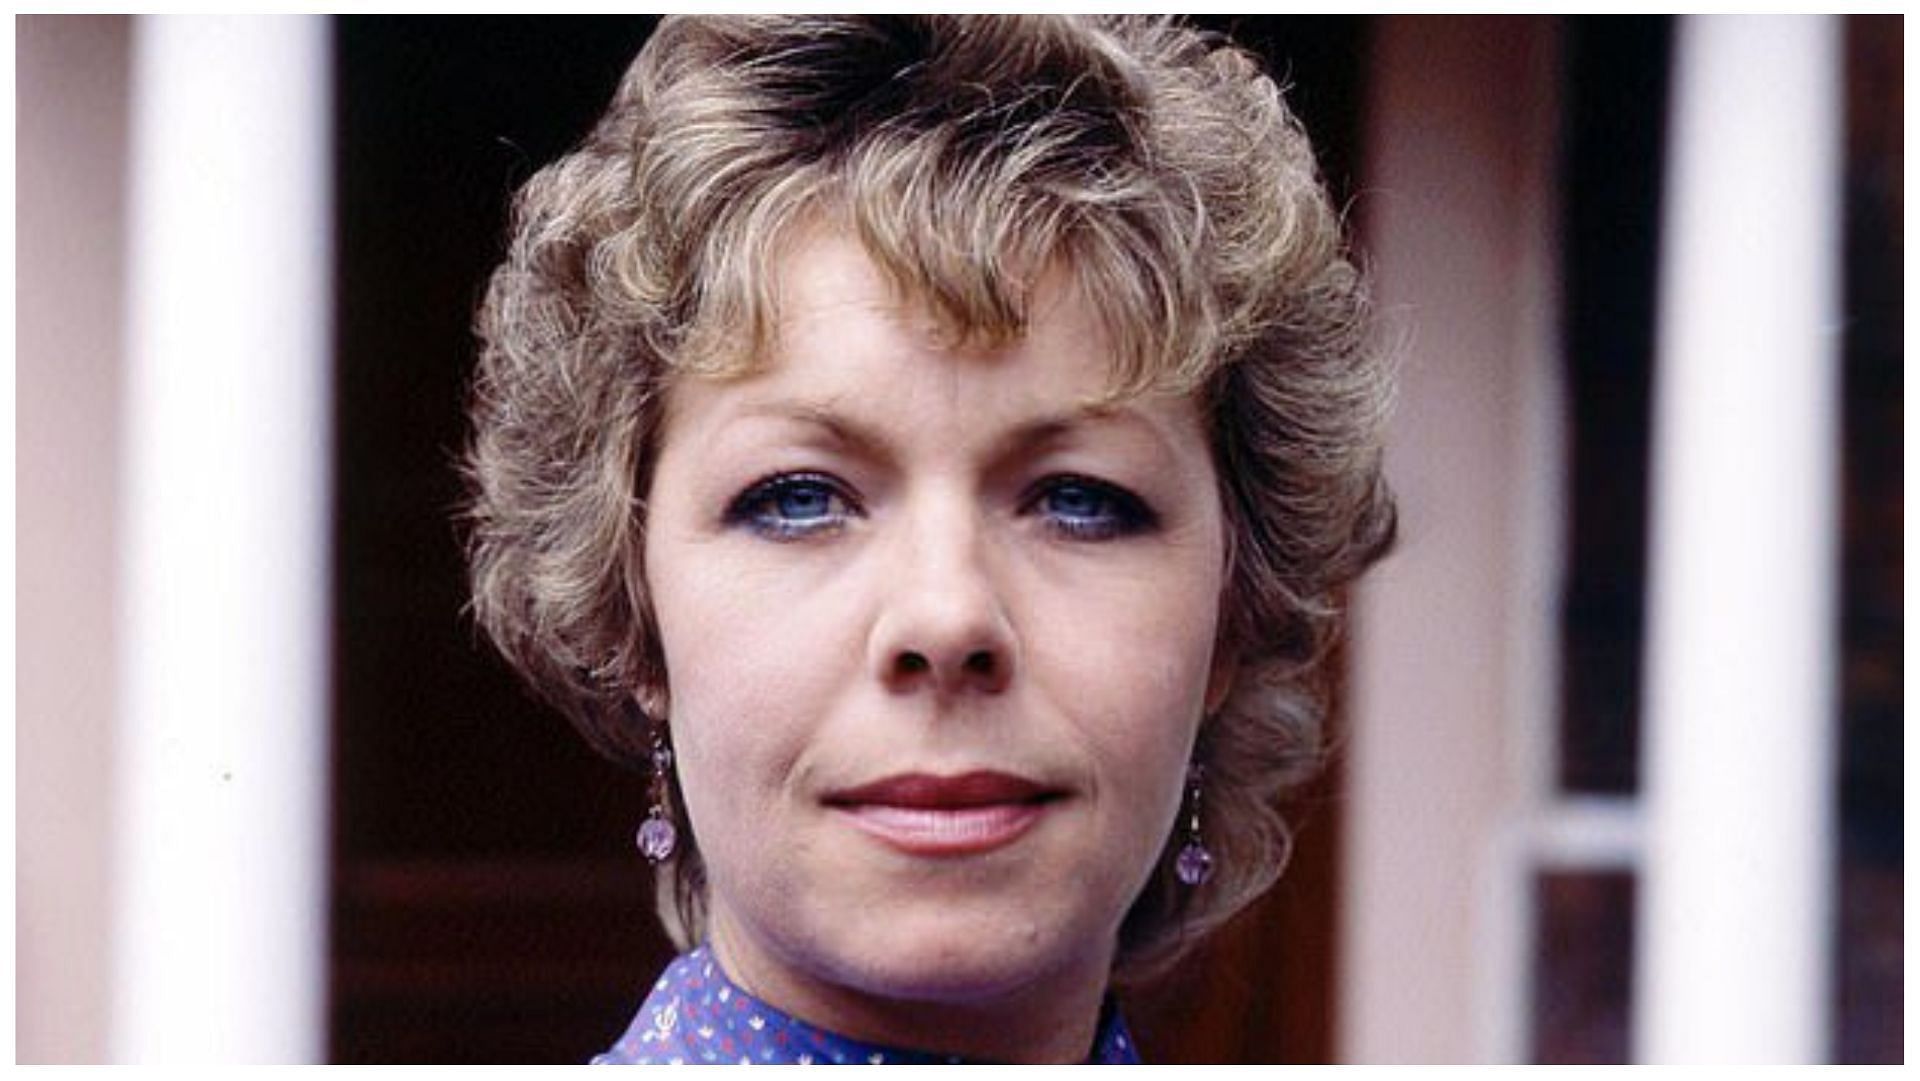 Gwyneth Powell appeared in various TV shows (Image via cpsouthon/Twitter)